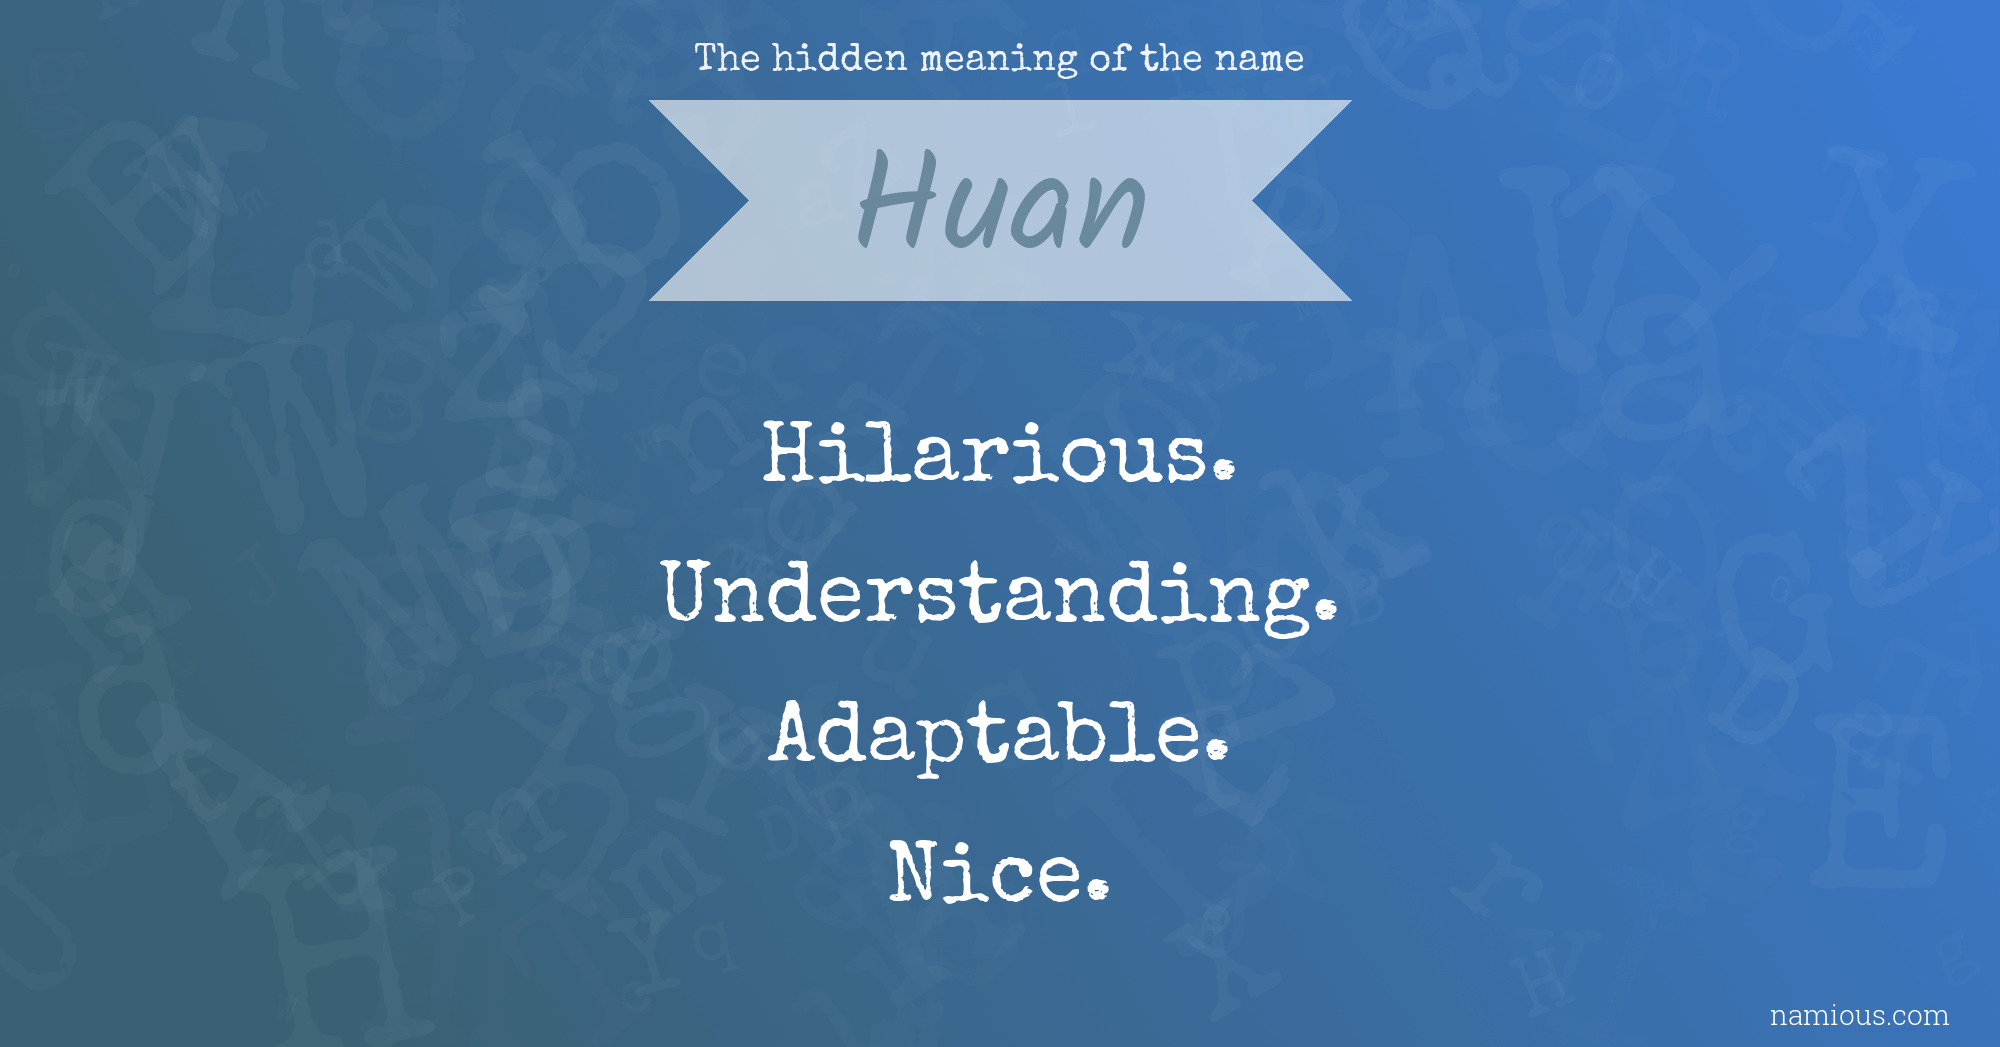 The hidden meaning of the name Huan